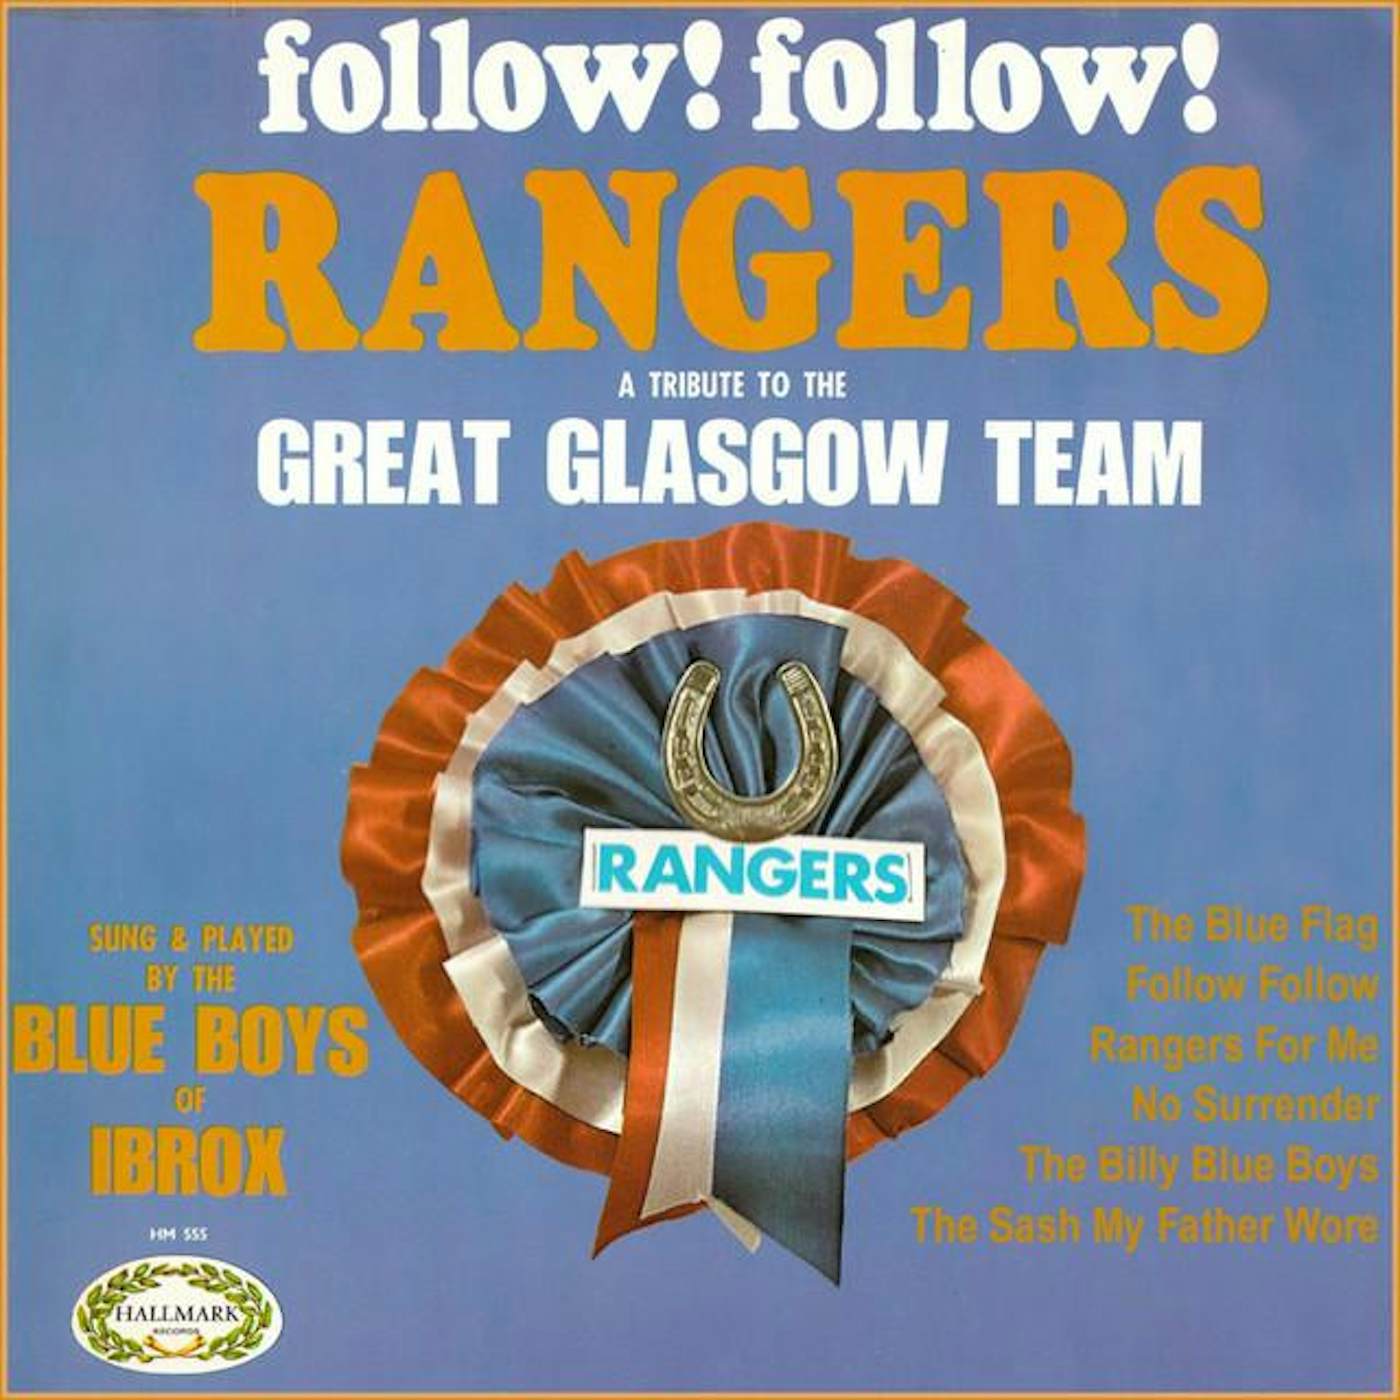 Glasgow Rangers Supporters Songs, Vol. 1 - Album by Glasgow Rangers  Supporters